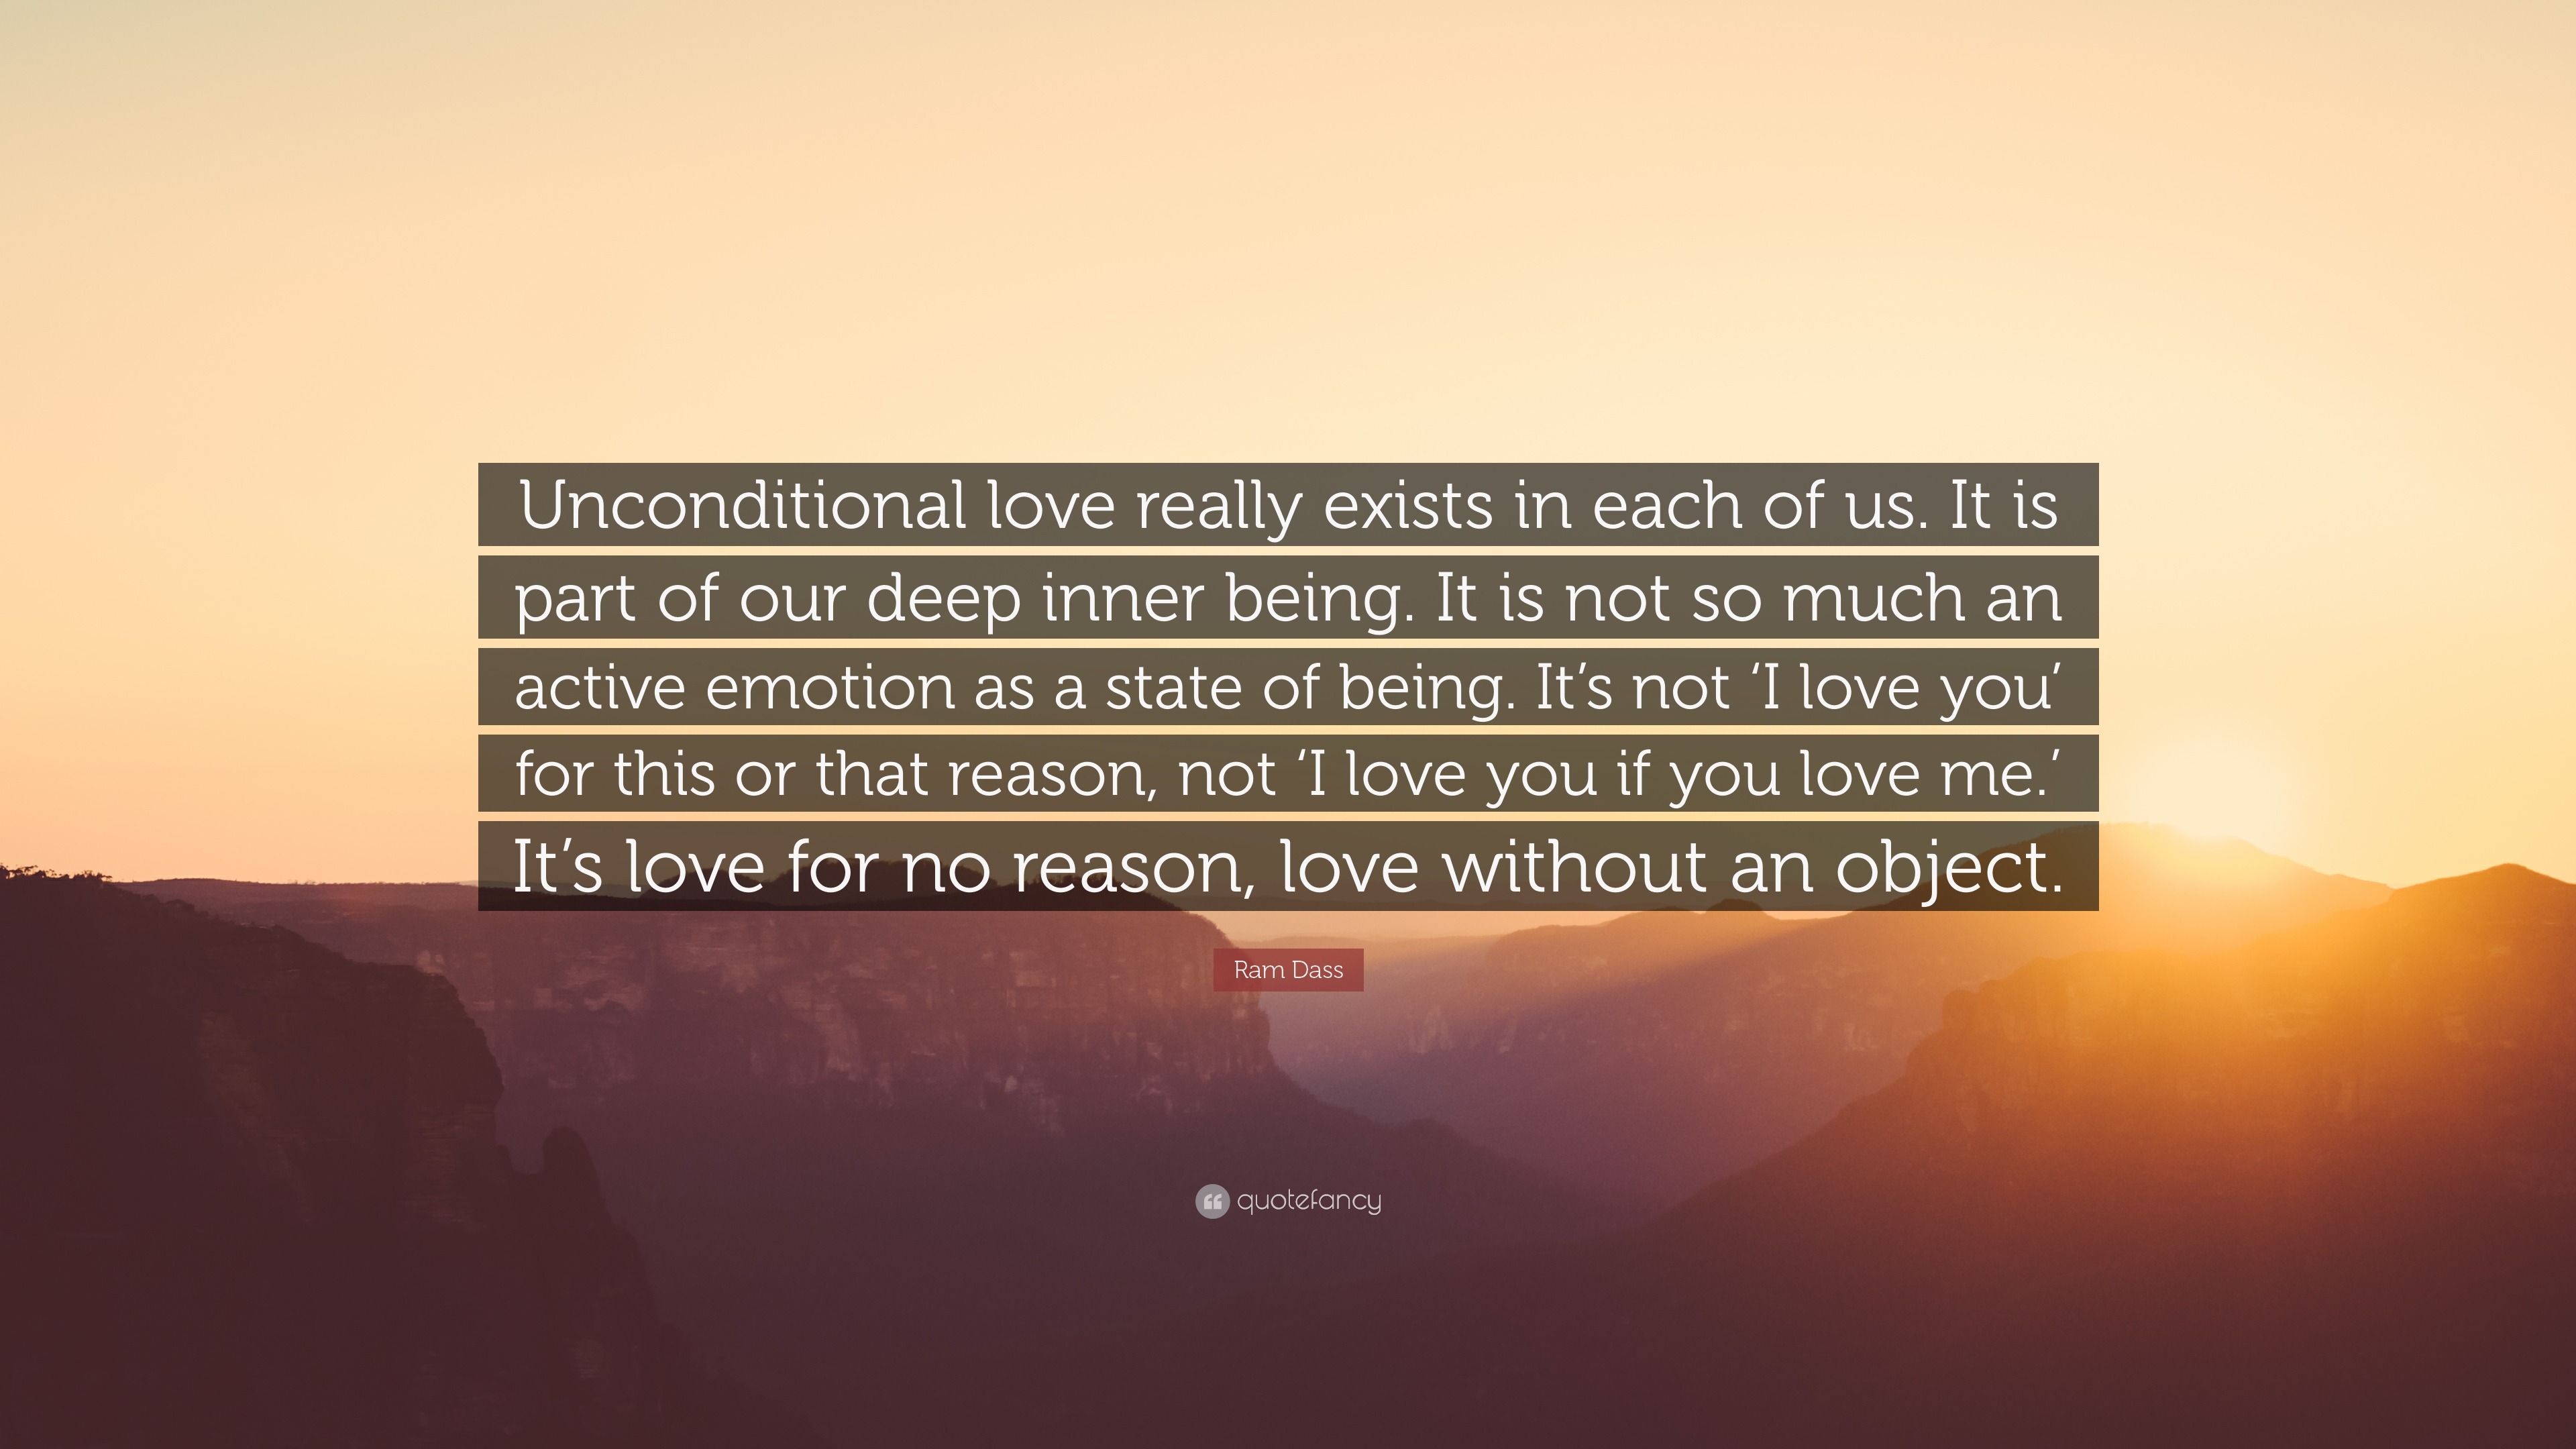 does unconditional love exist